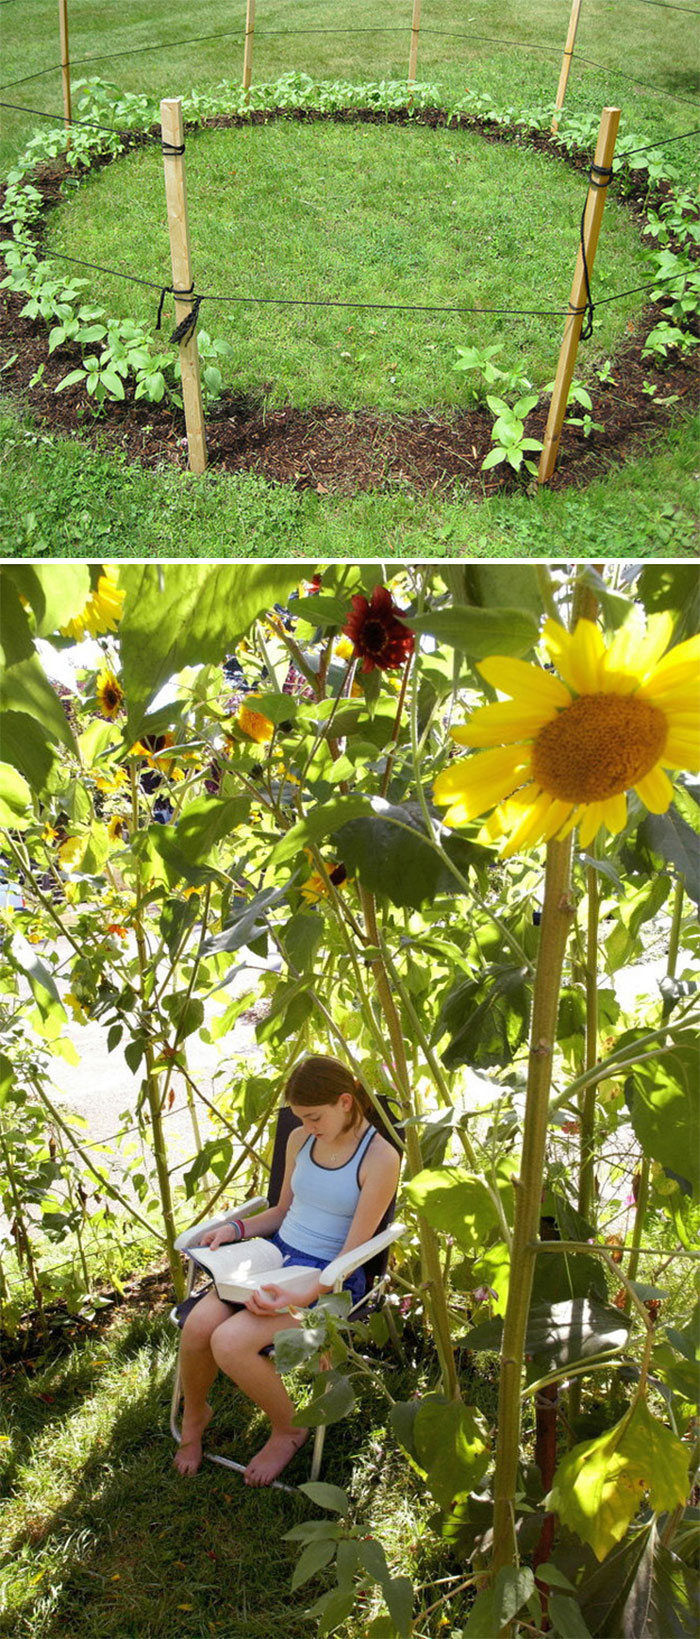 Grow A Sunflower House For The Kids To Play In